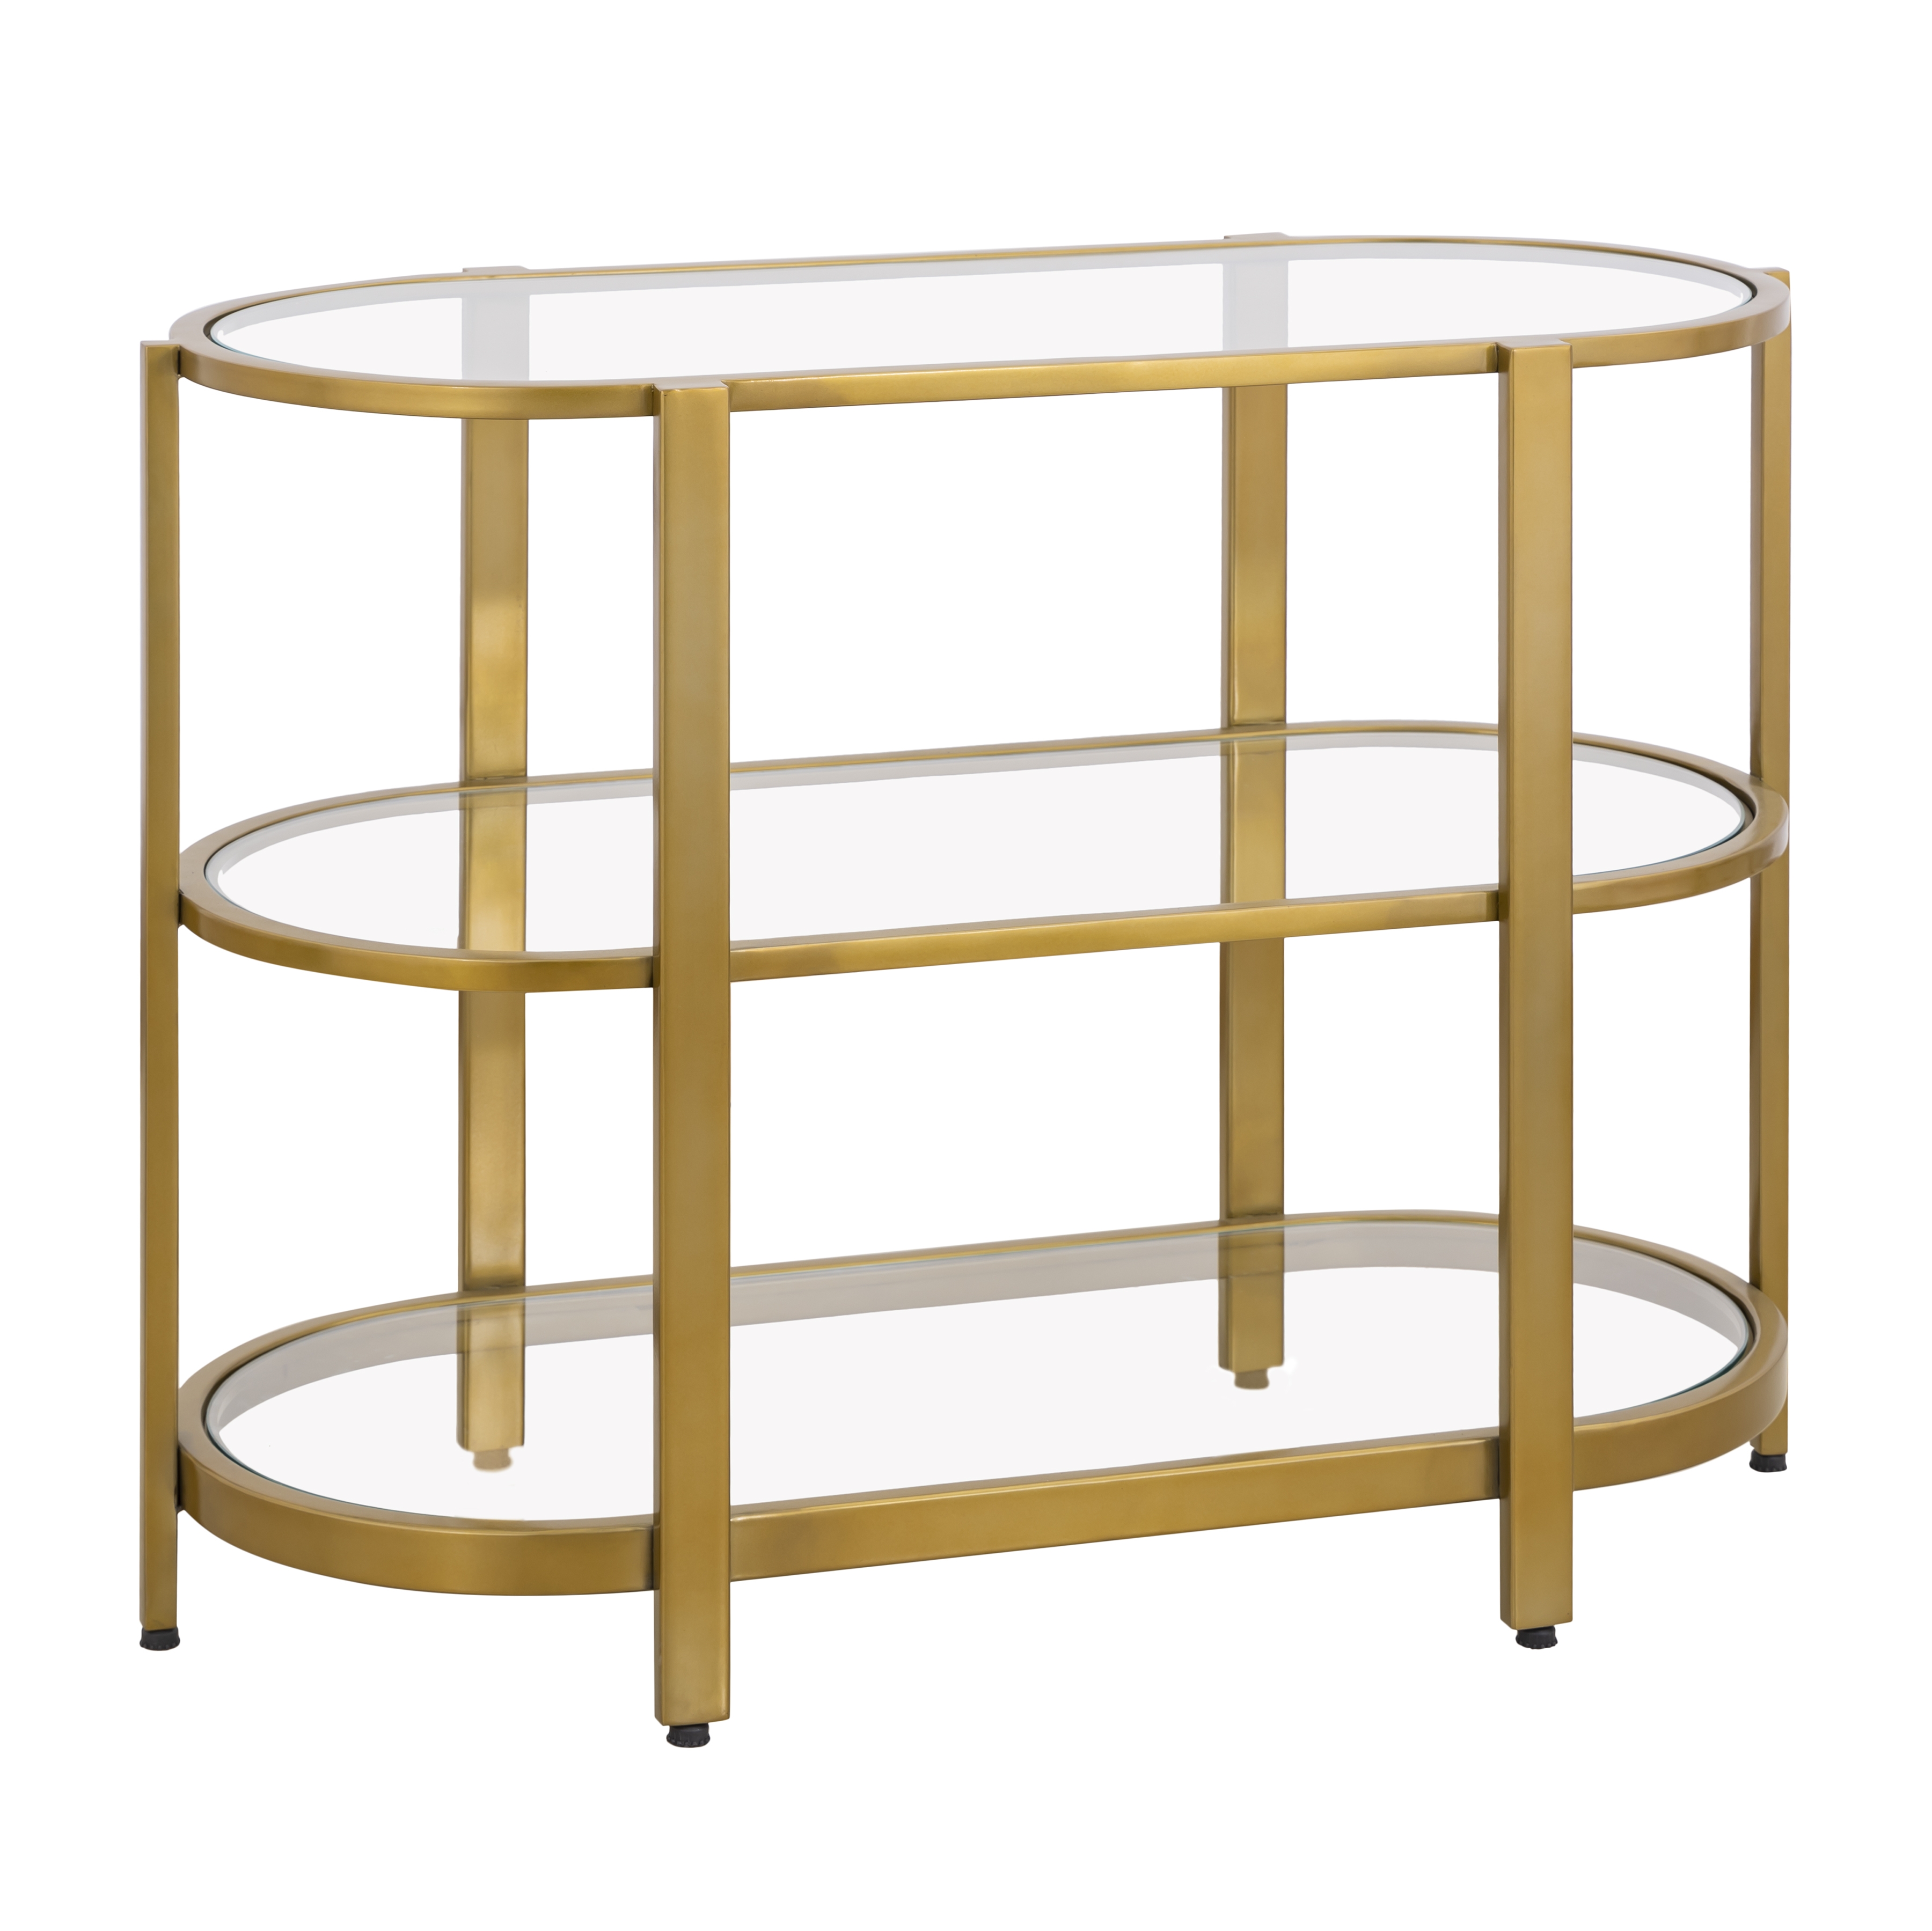 Blain Console Table - Brass - Image 1